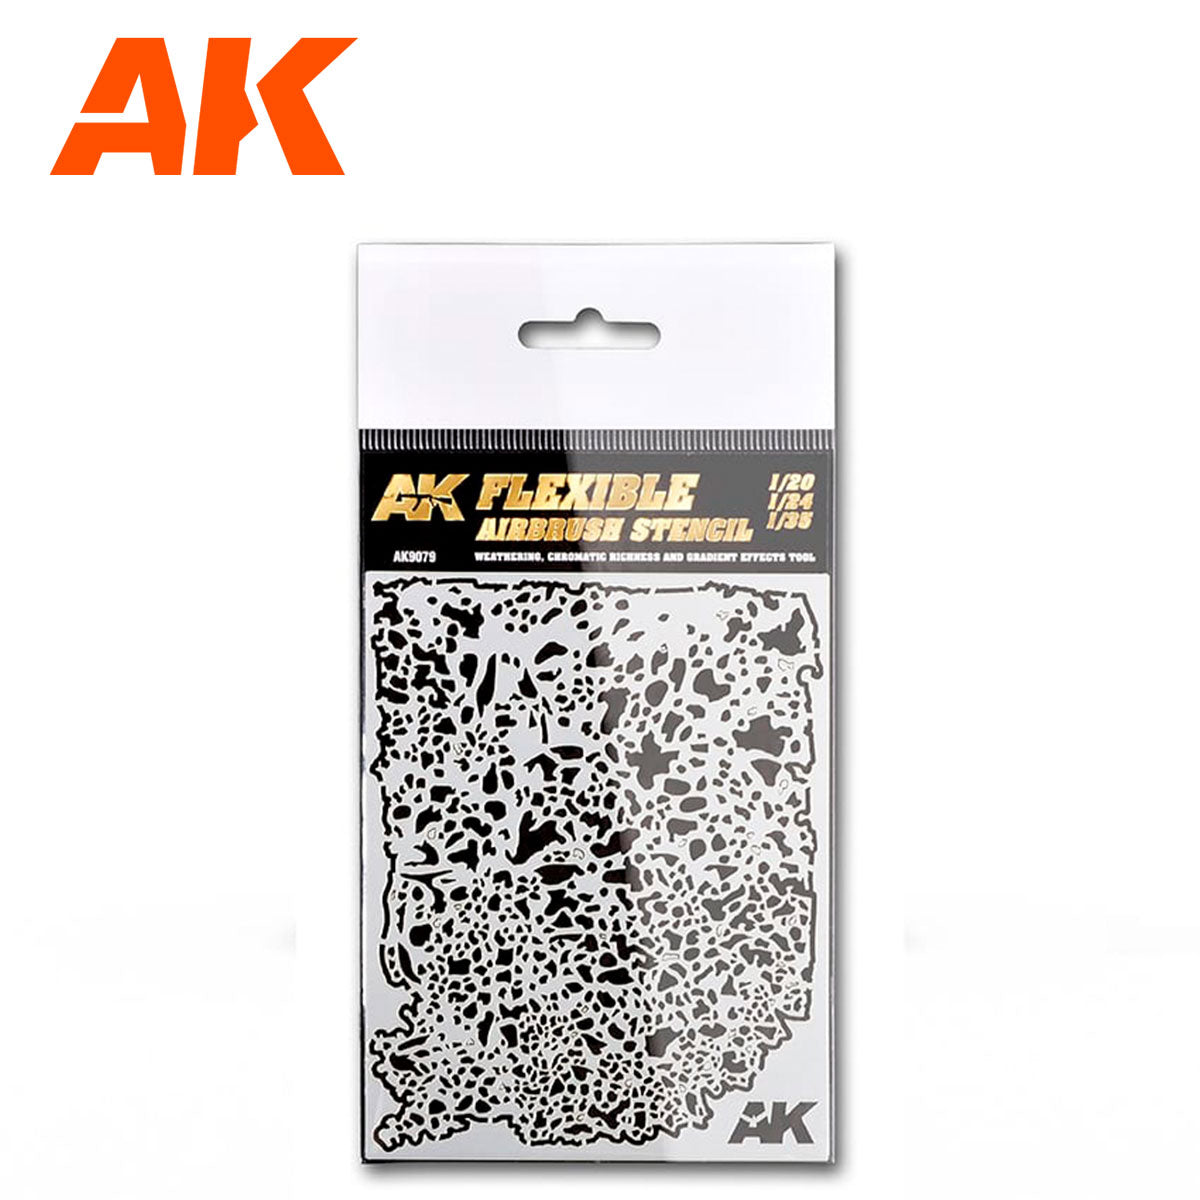 FLEXIBLE AIRBRUSH STENCIL 1/20 – 1/24 – 1/35 Hobby Supplies AK INTERACTIVE    | Red Claw Gaming